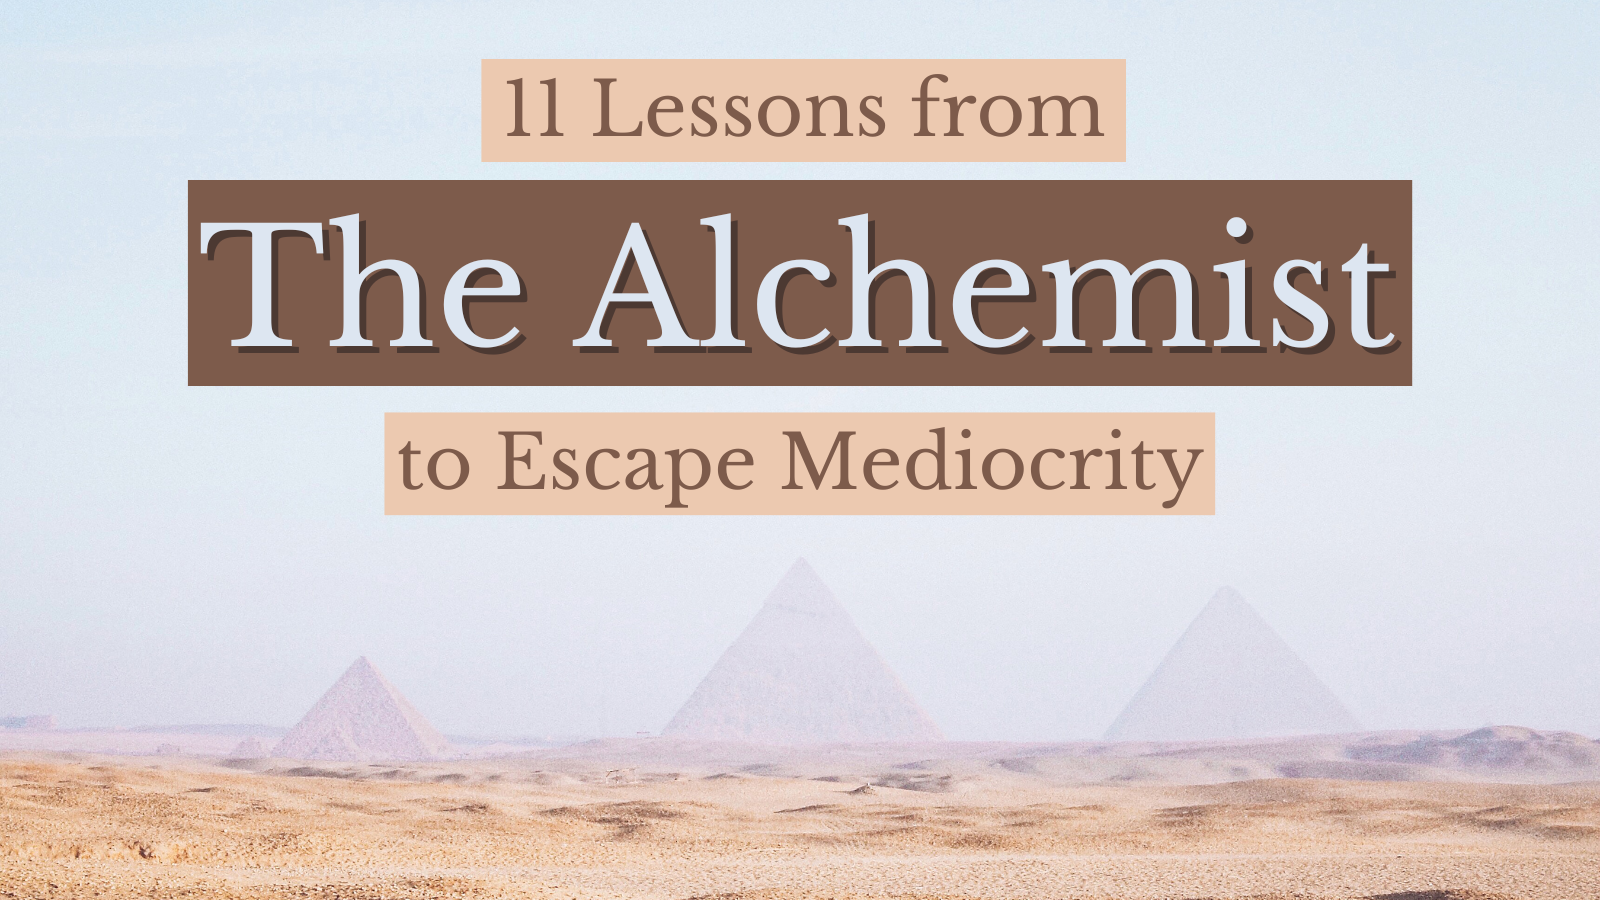 The Alchemist Changed My Life, Top Lessons